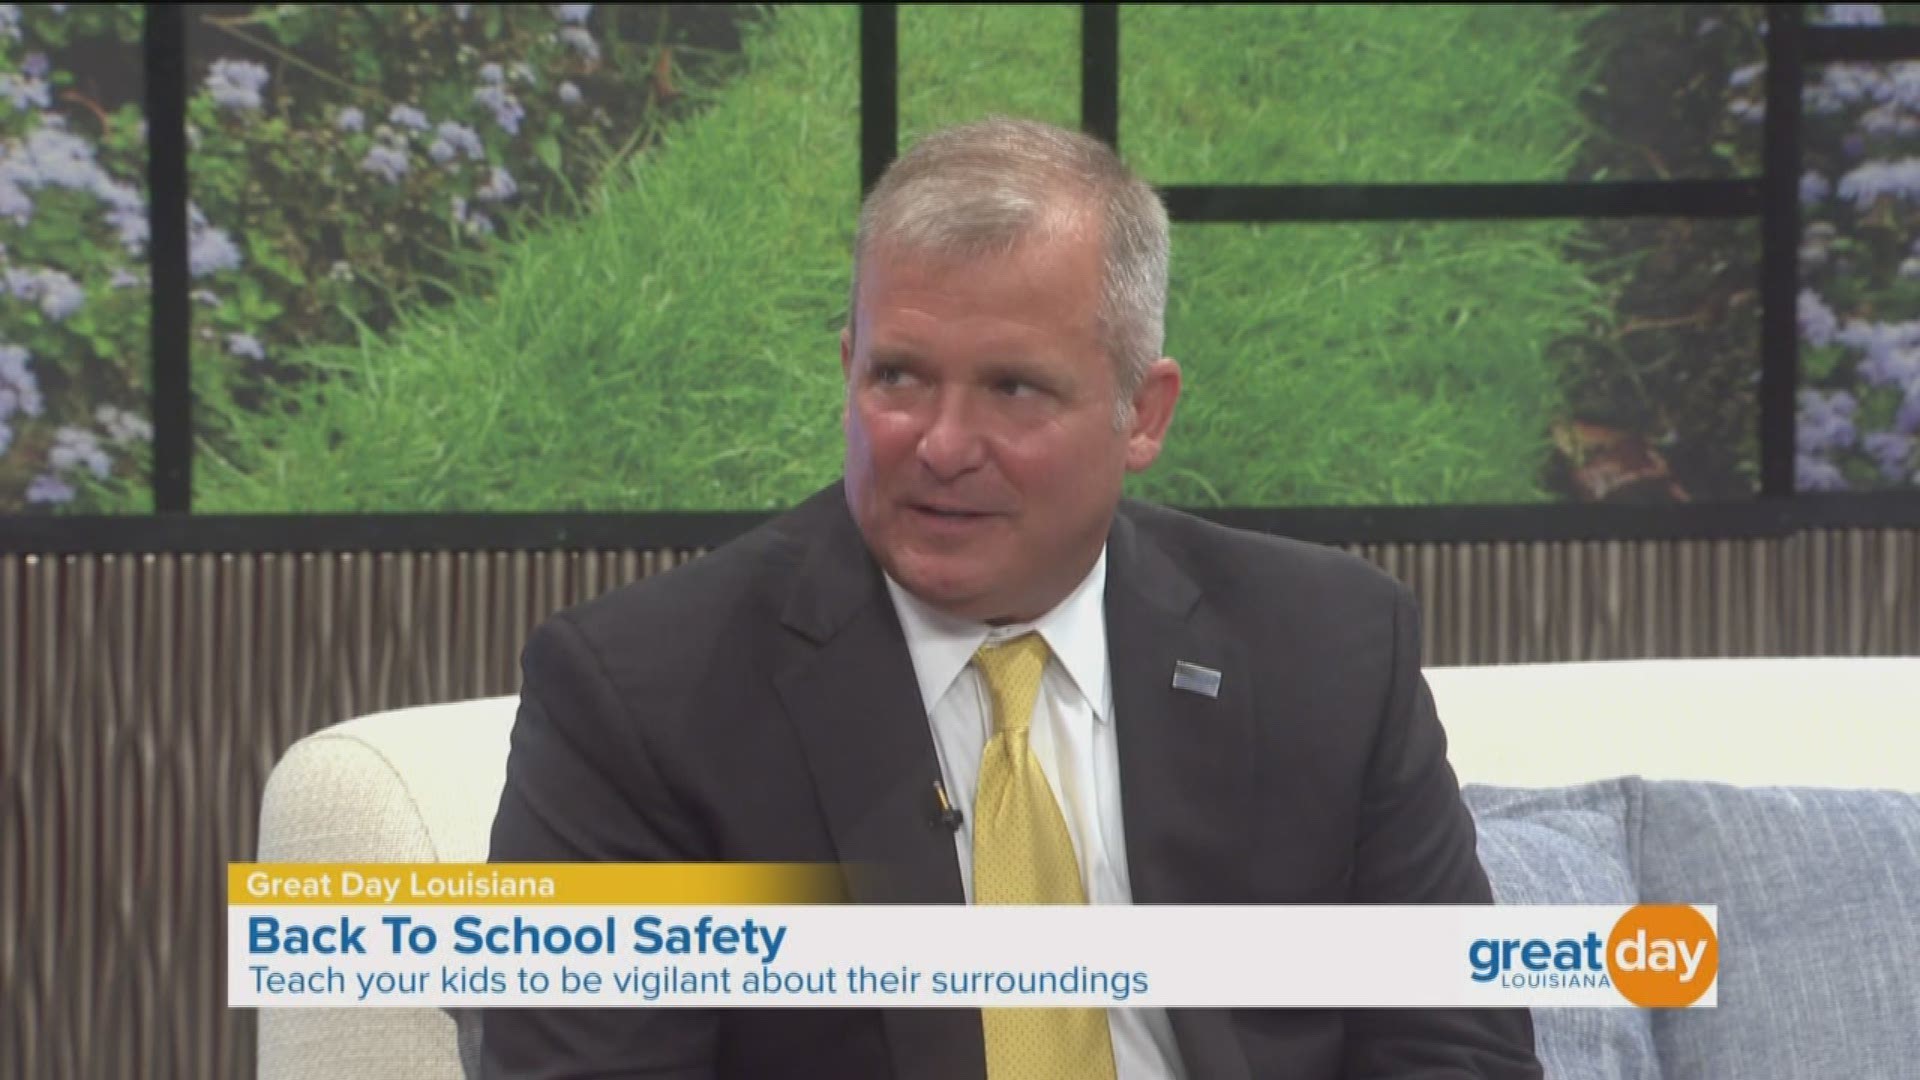 Robert Allen, Emergency Management Professor at Tulane School of Professional Advancement, shares  some tips on how to keep your kids safe as they head back to school.